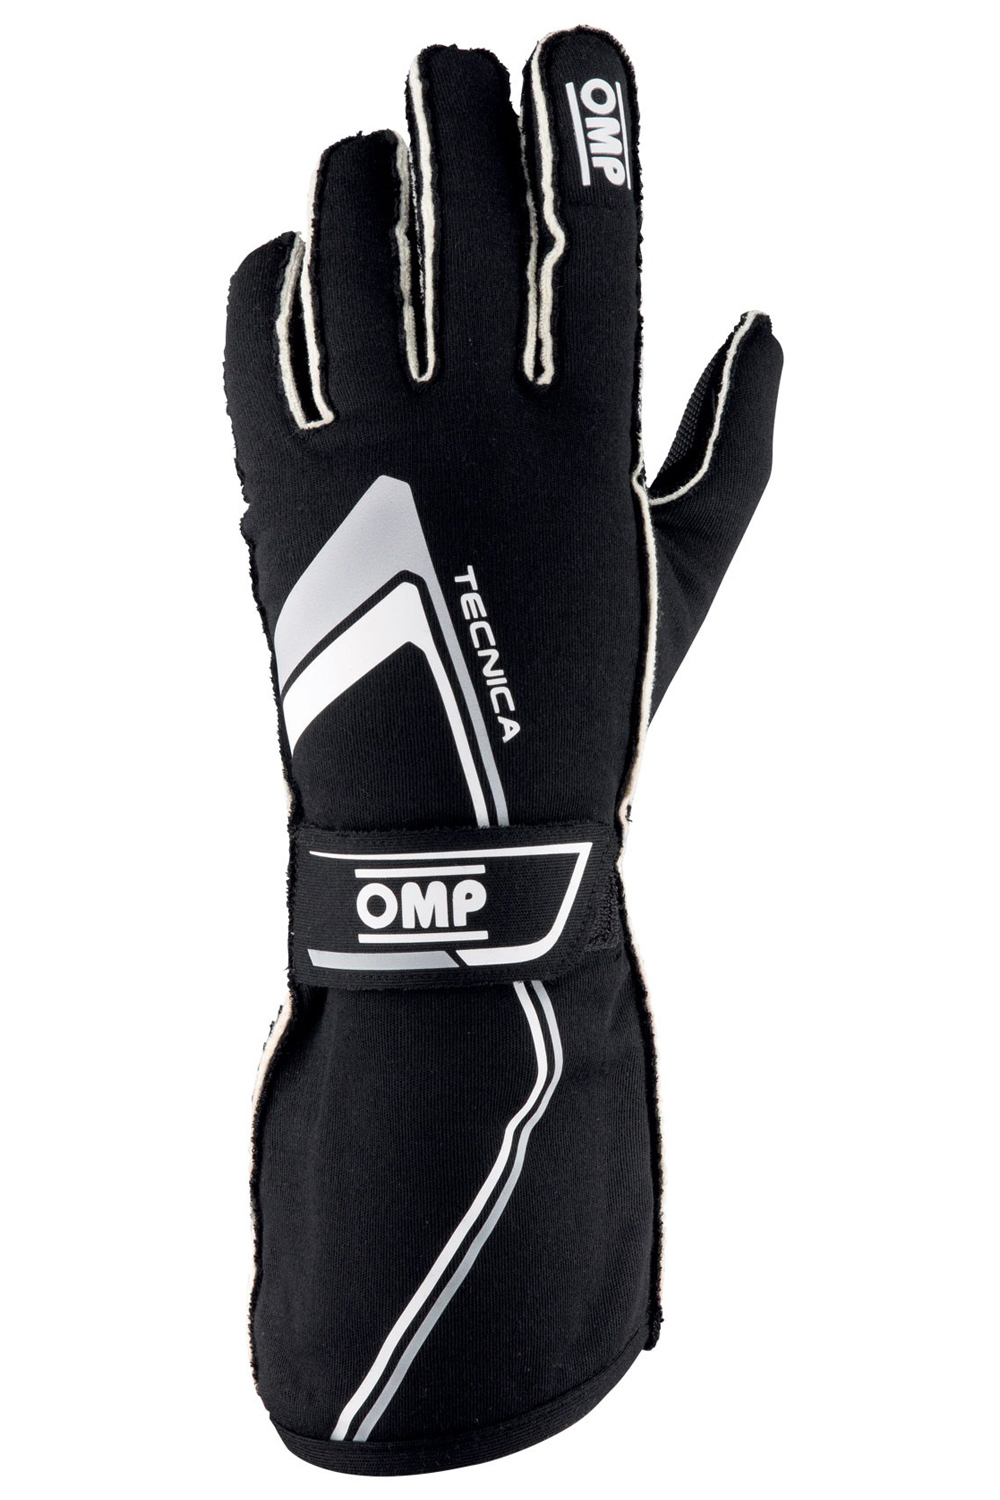 OMP Racing IB772NWXL - Gloves, Tecnica, Driving, FIA Approved, Double Layer, Fire Retardant Fabric, White, X-Large, Pair